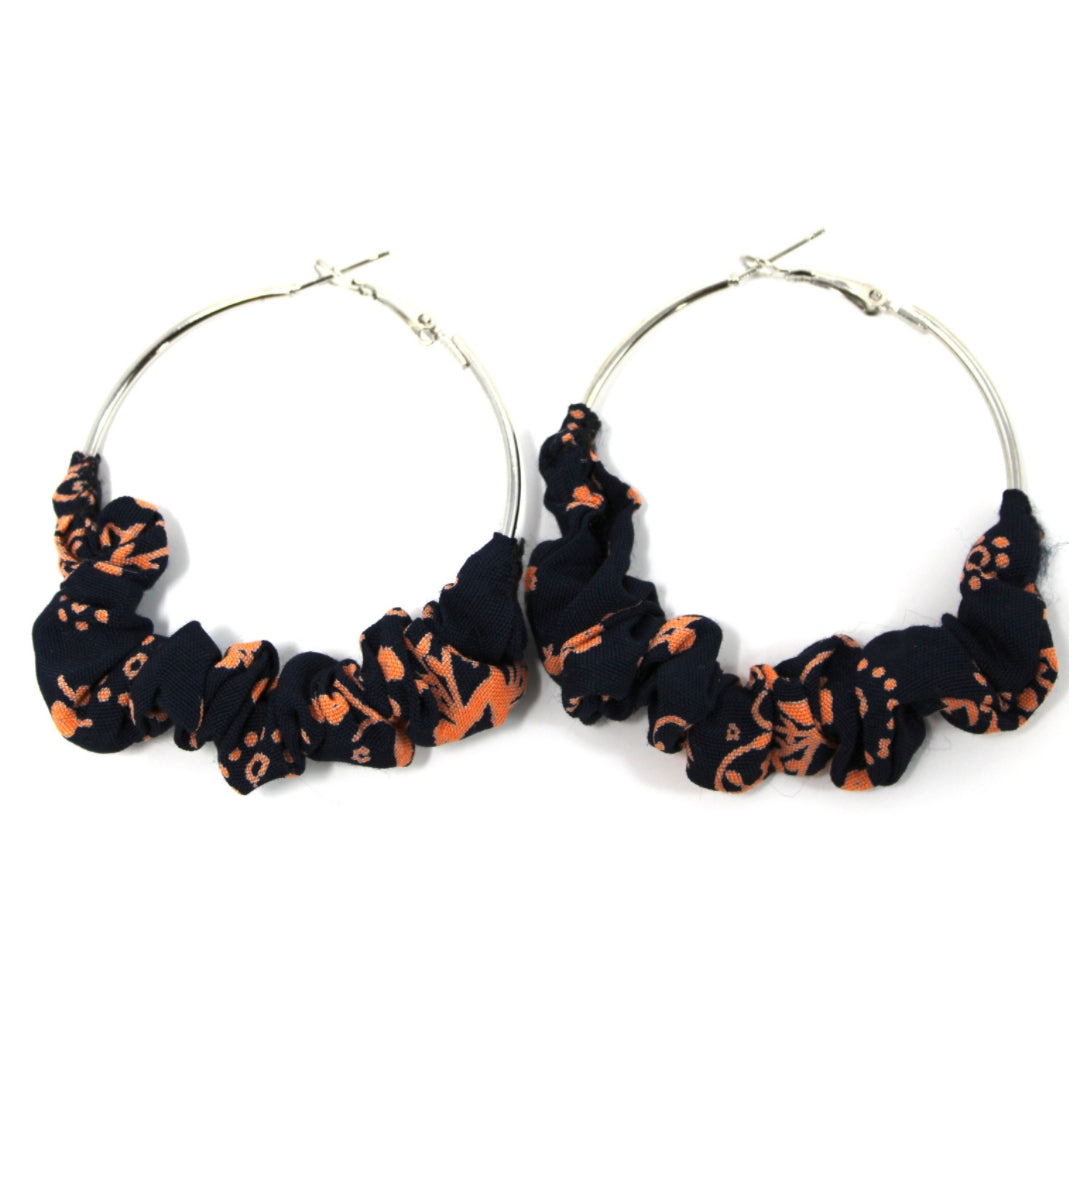 50mm Ruffle Hoops - Floral